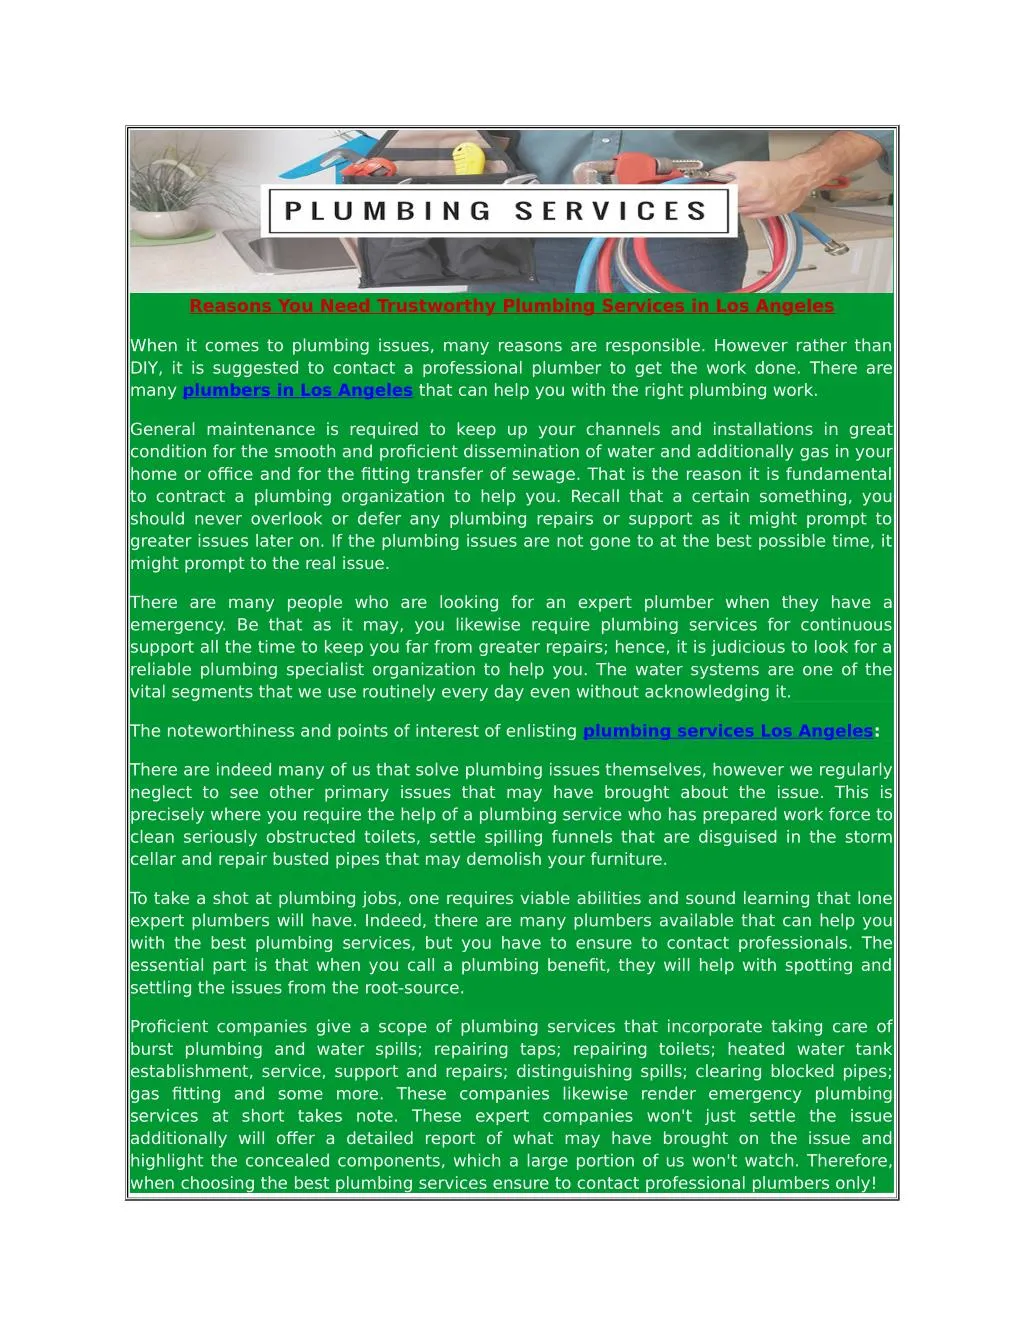 reasons you need trustworthy plumbing services